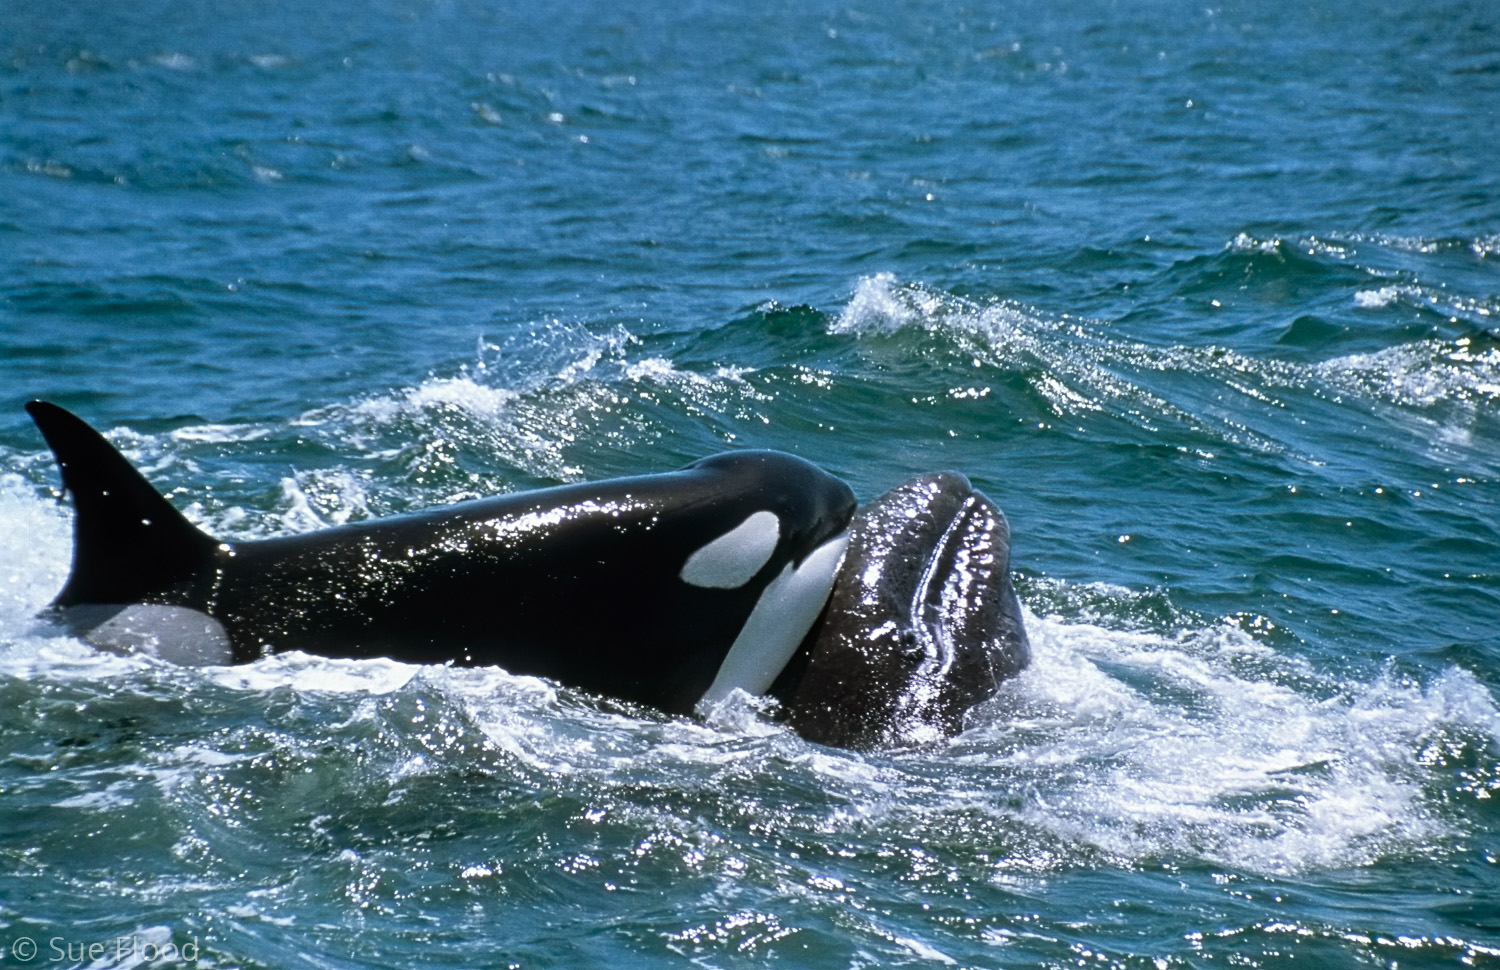 Killer whale or orca attacks grey whale calf, during filming of The Blue Planet, Monterey Bay, California.